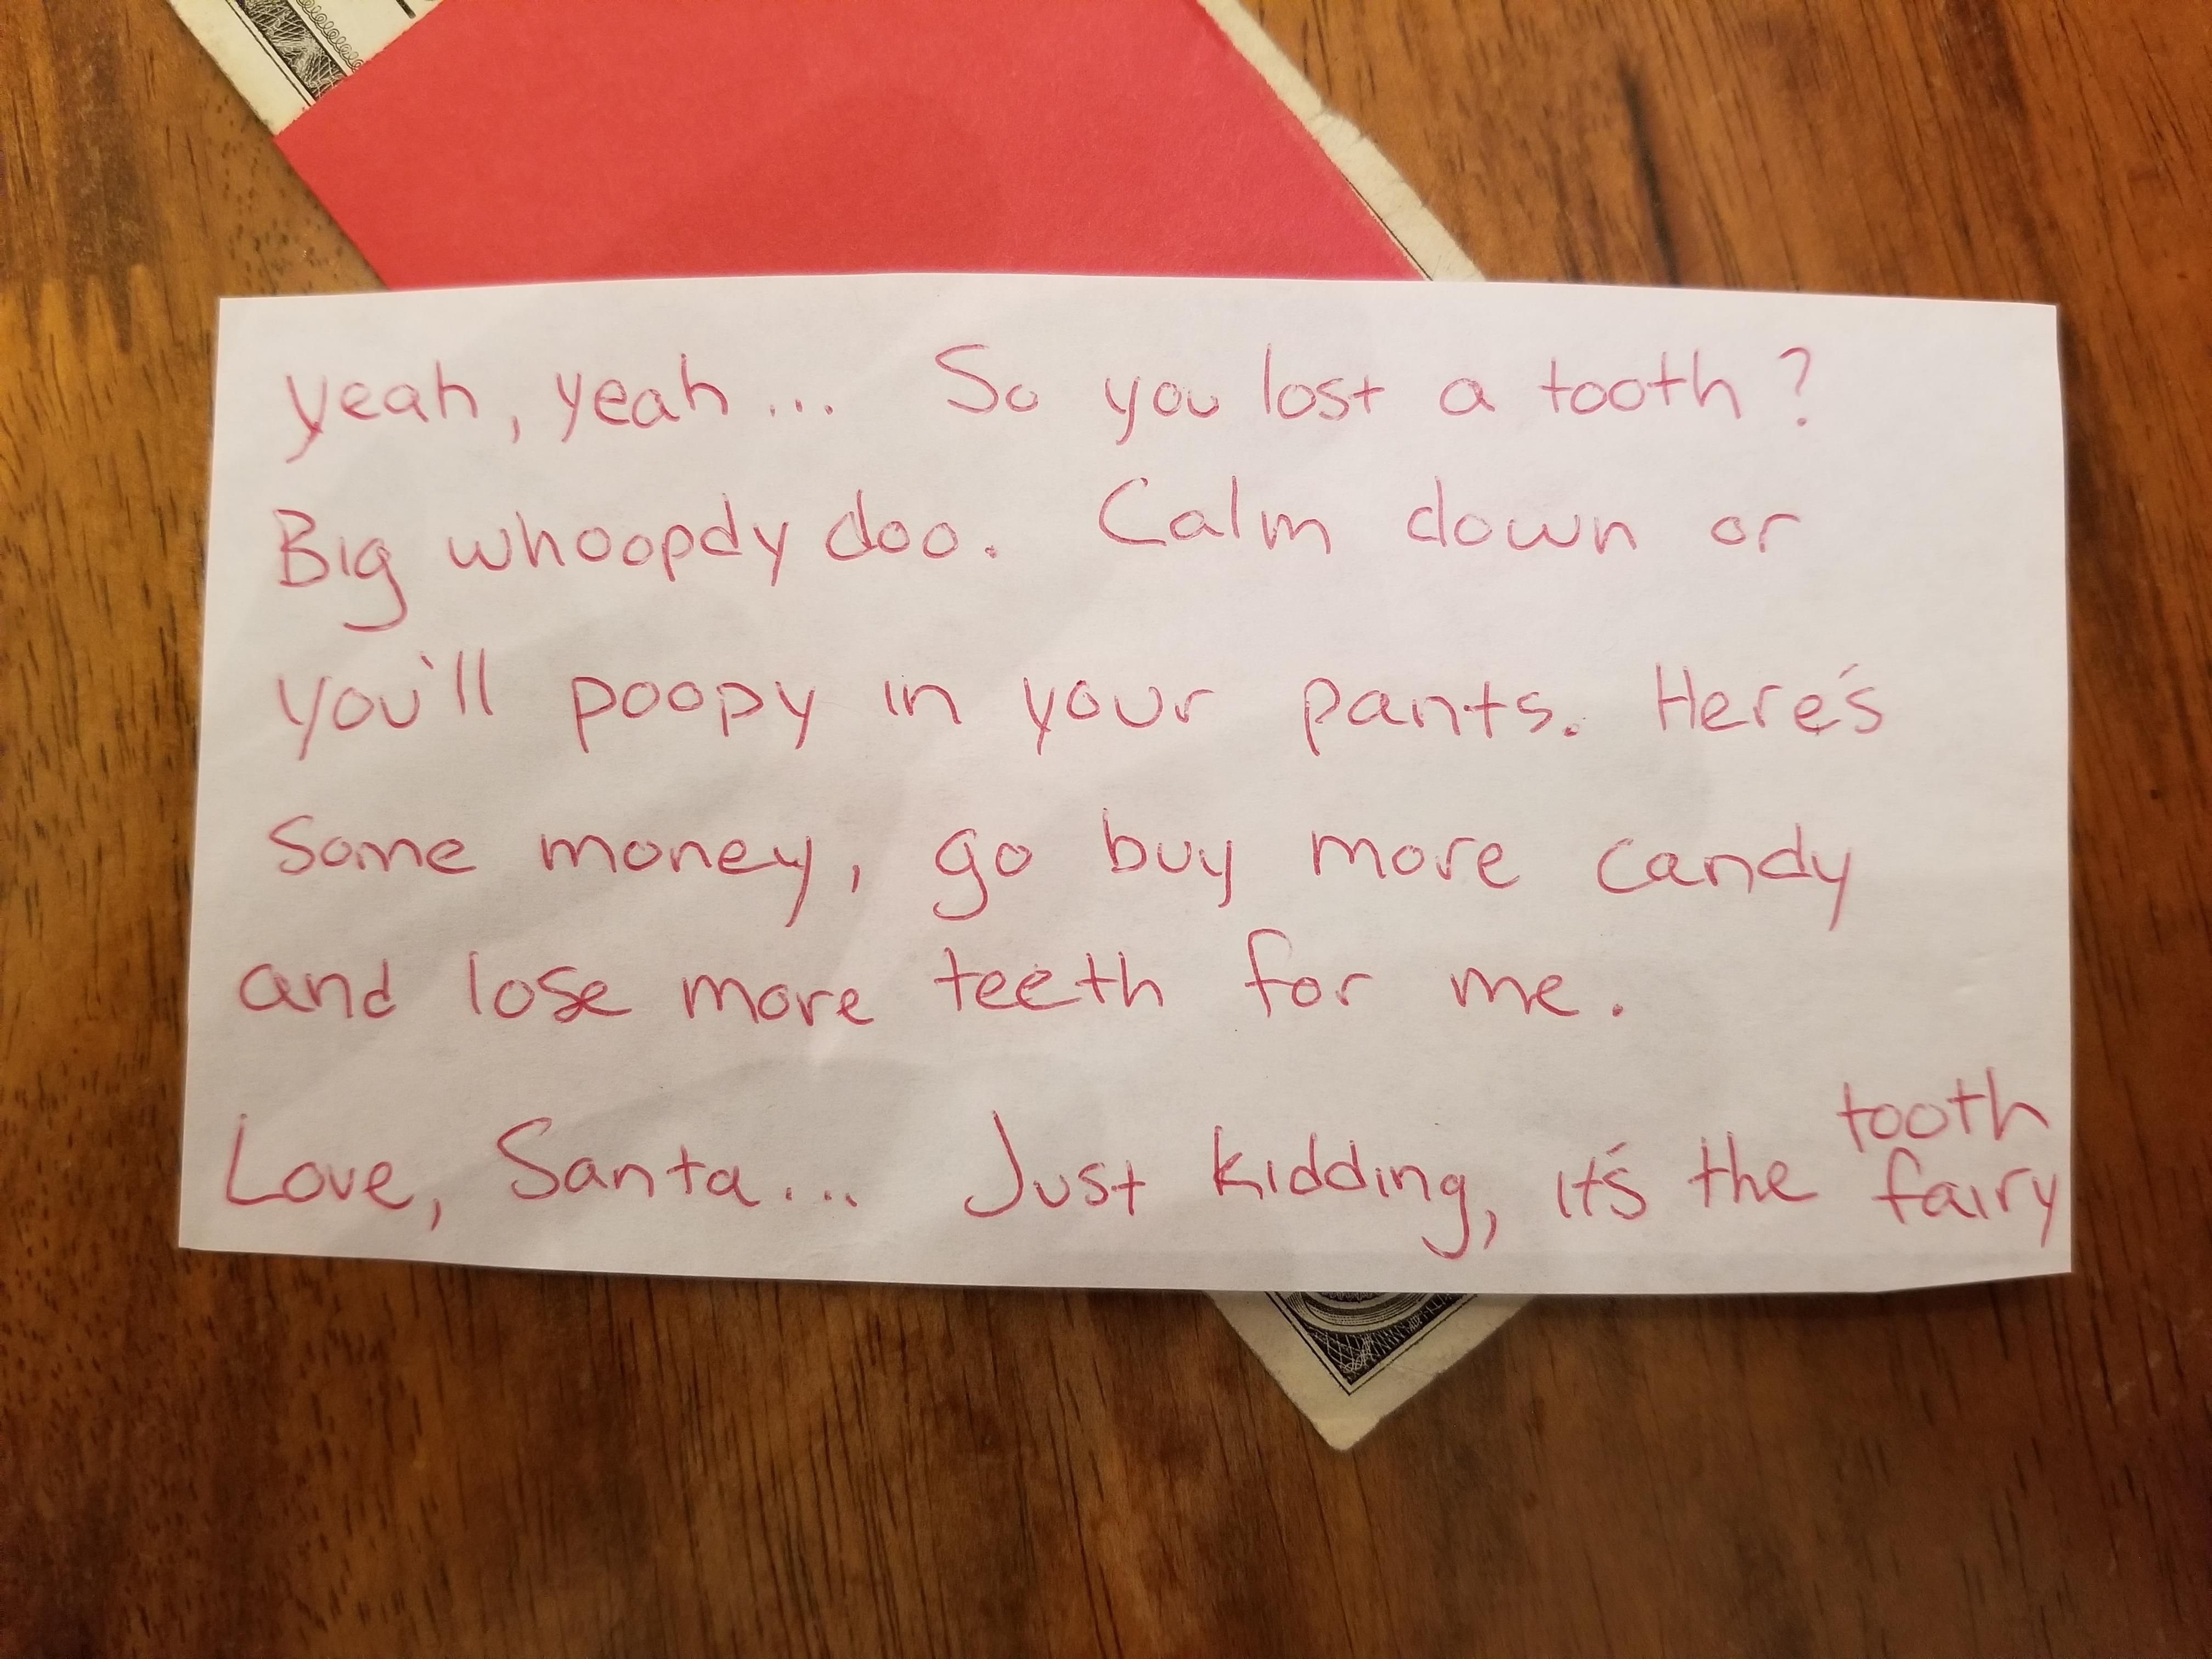 Wife forgot about tooth fairy duty and is sound asleep. Guess who gets to be the tooth fairy is tonight?